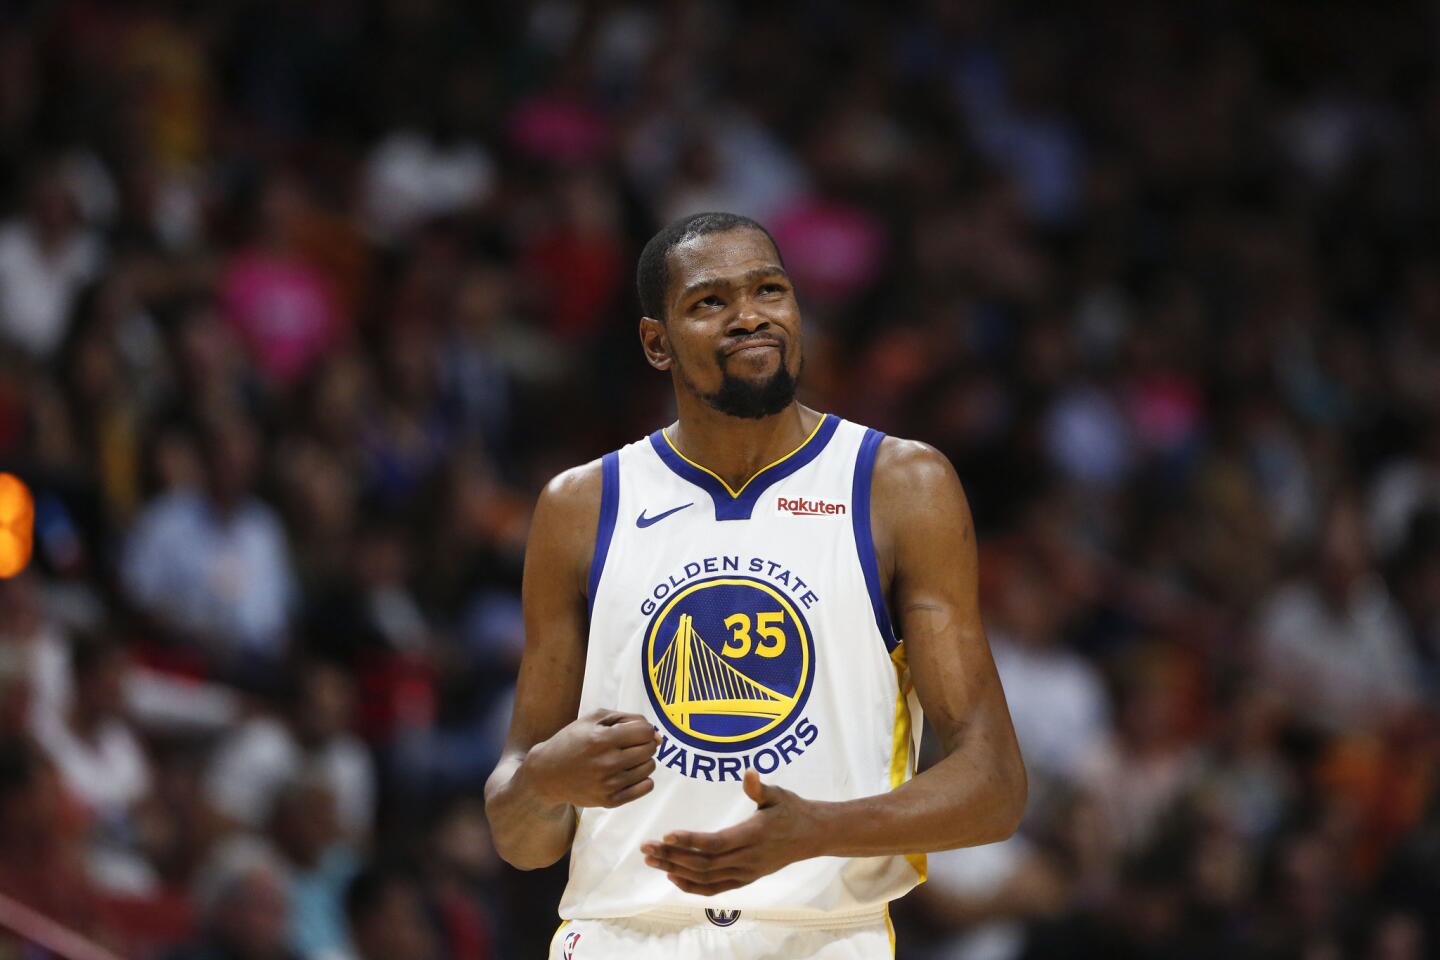 8. Kevin Durant, Golden State Warriors